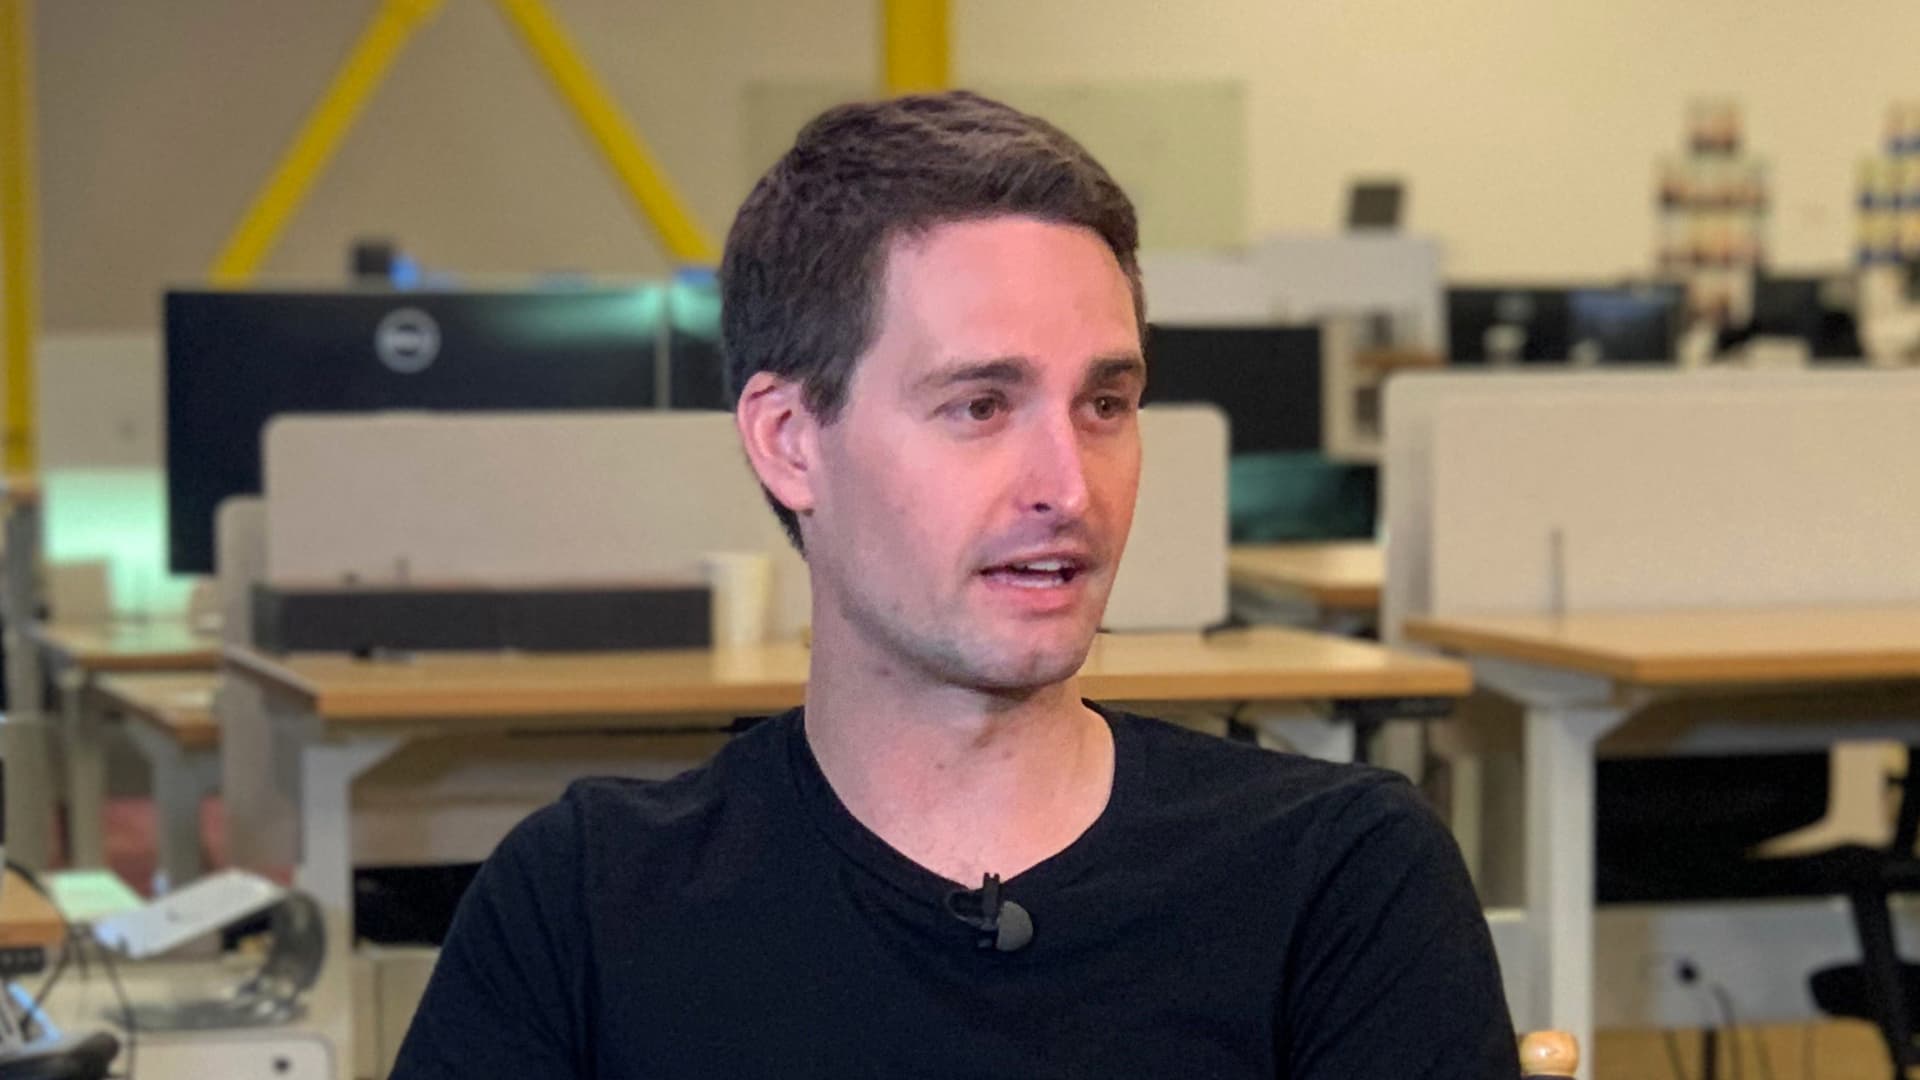 Snap stock plunges more than 30% to lowest level since early 2019